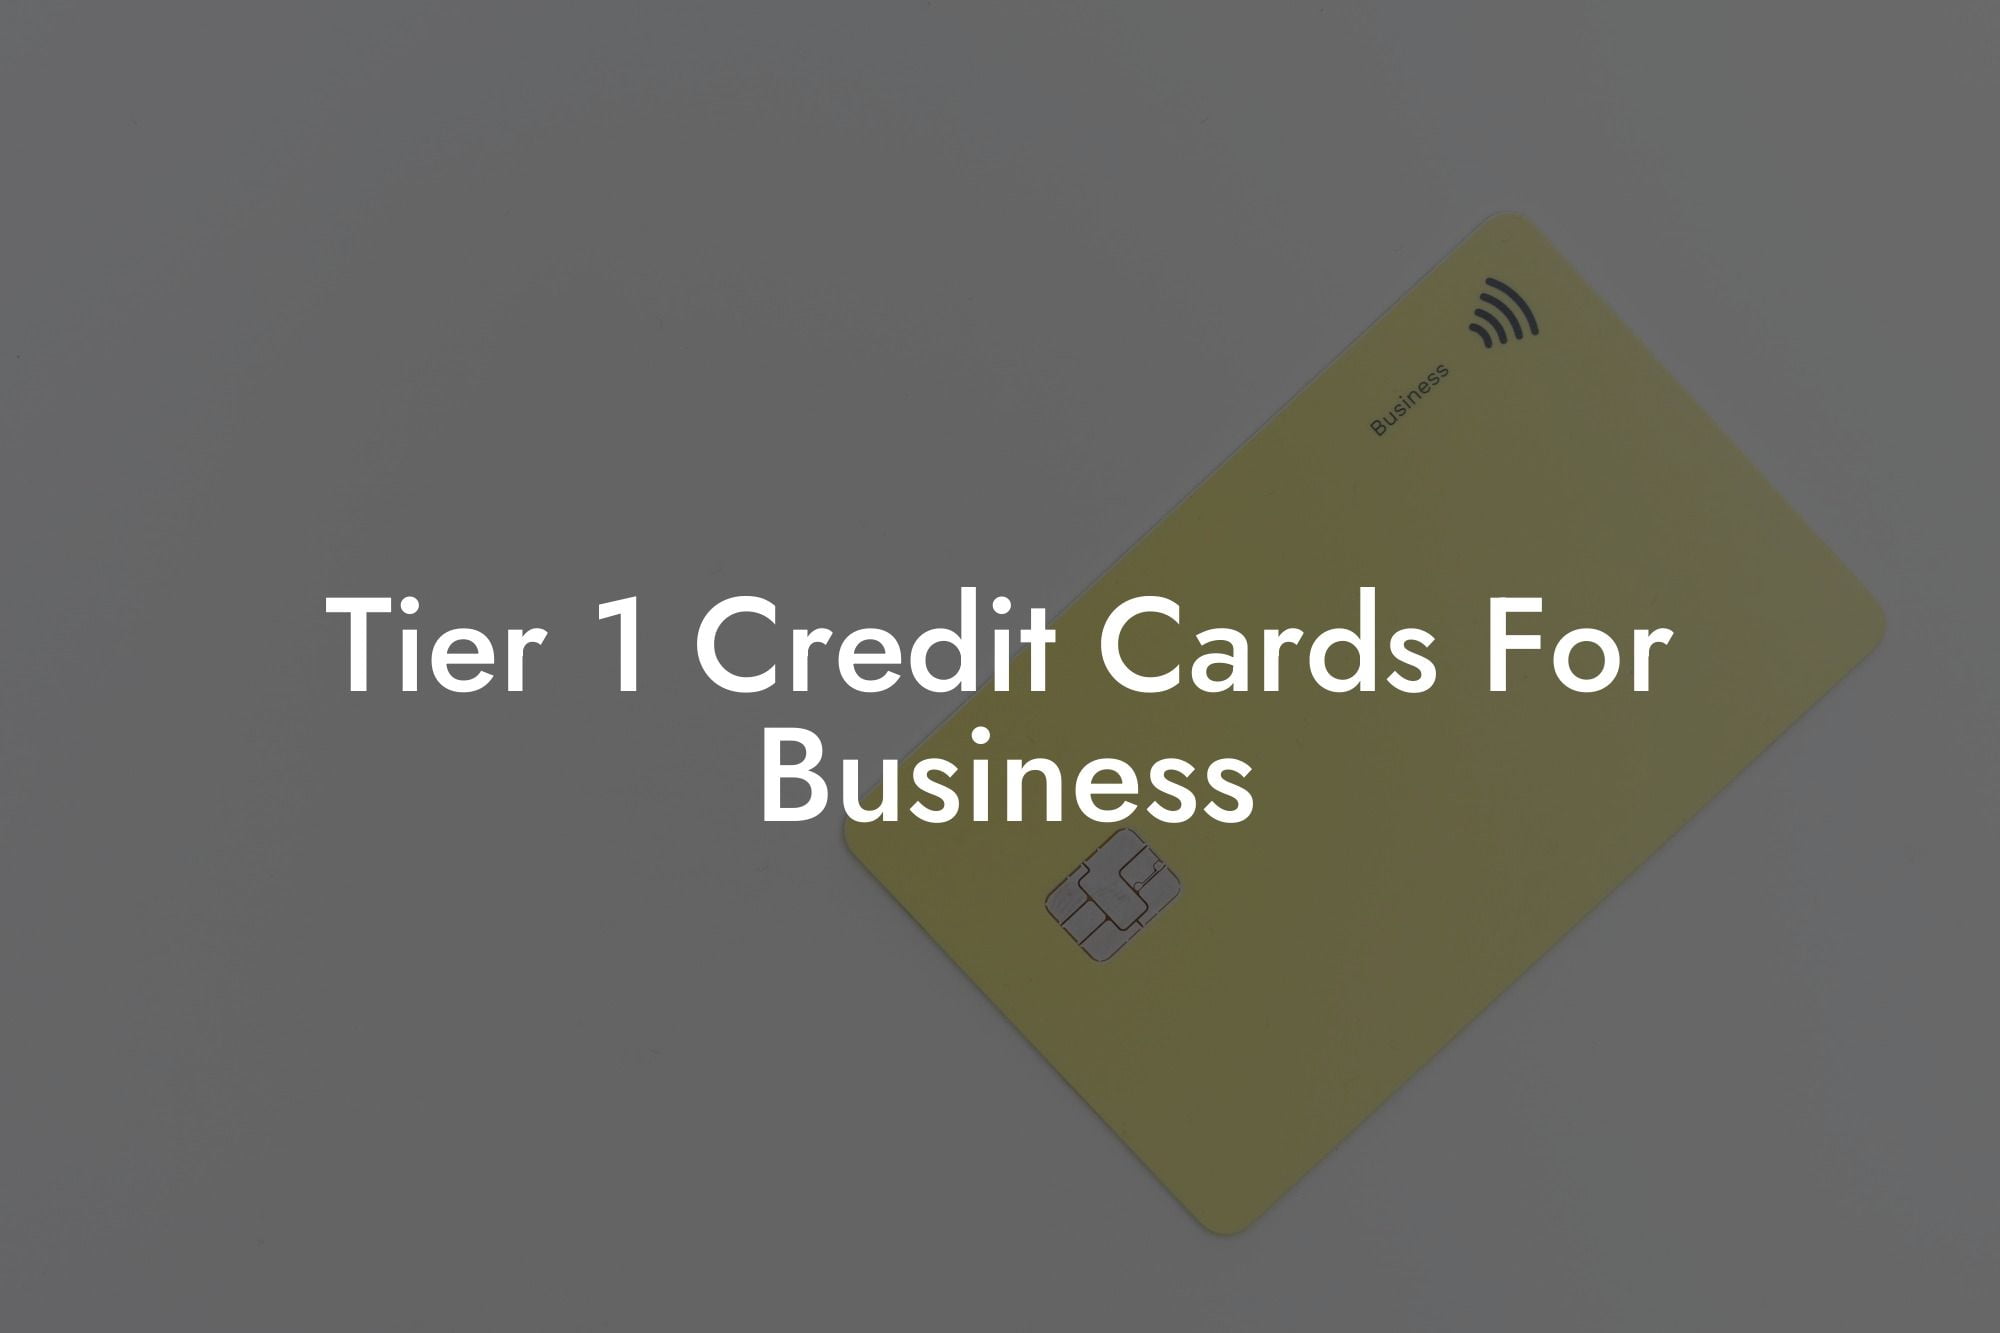 Tier 1 Credit Cards For Business